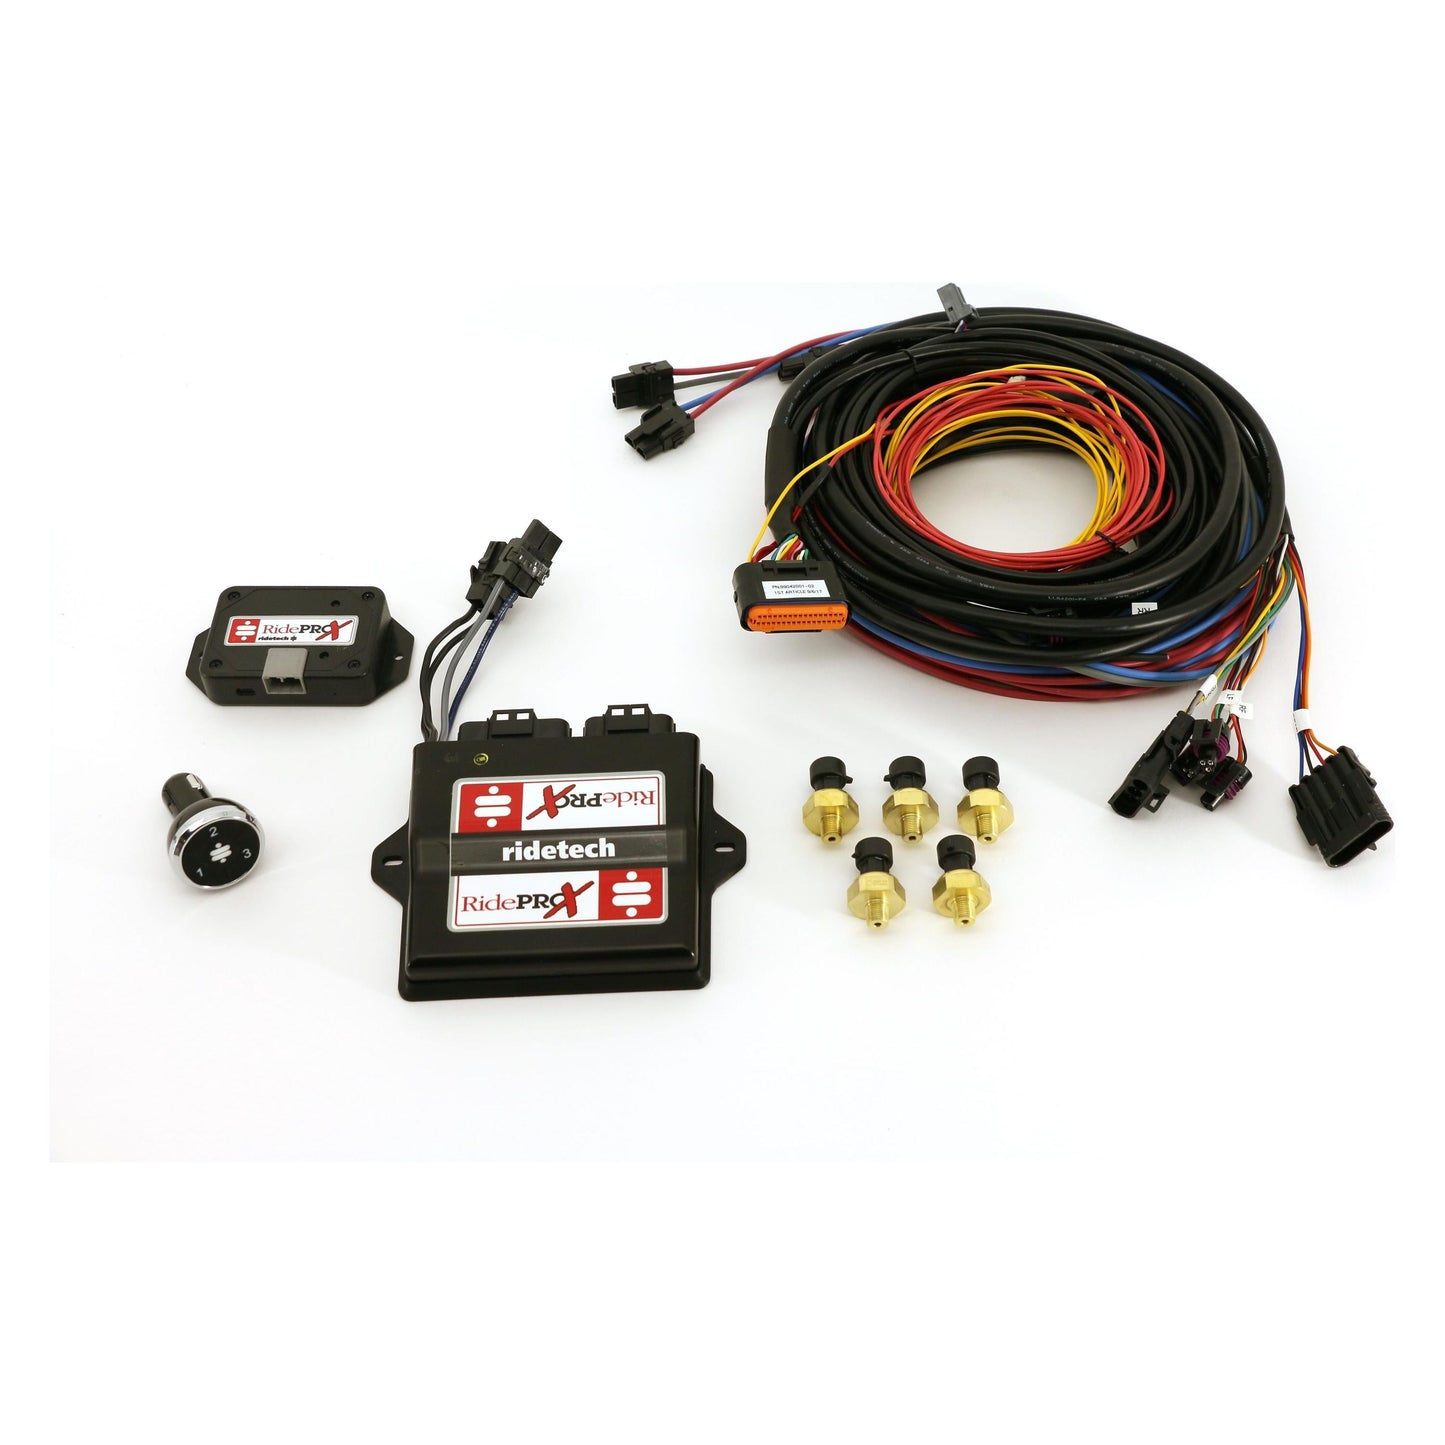 RideTech RidePro-X Air Suspension Leveling Control System